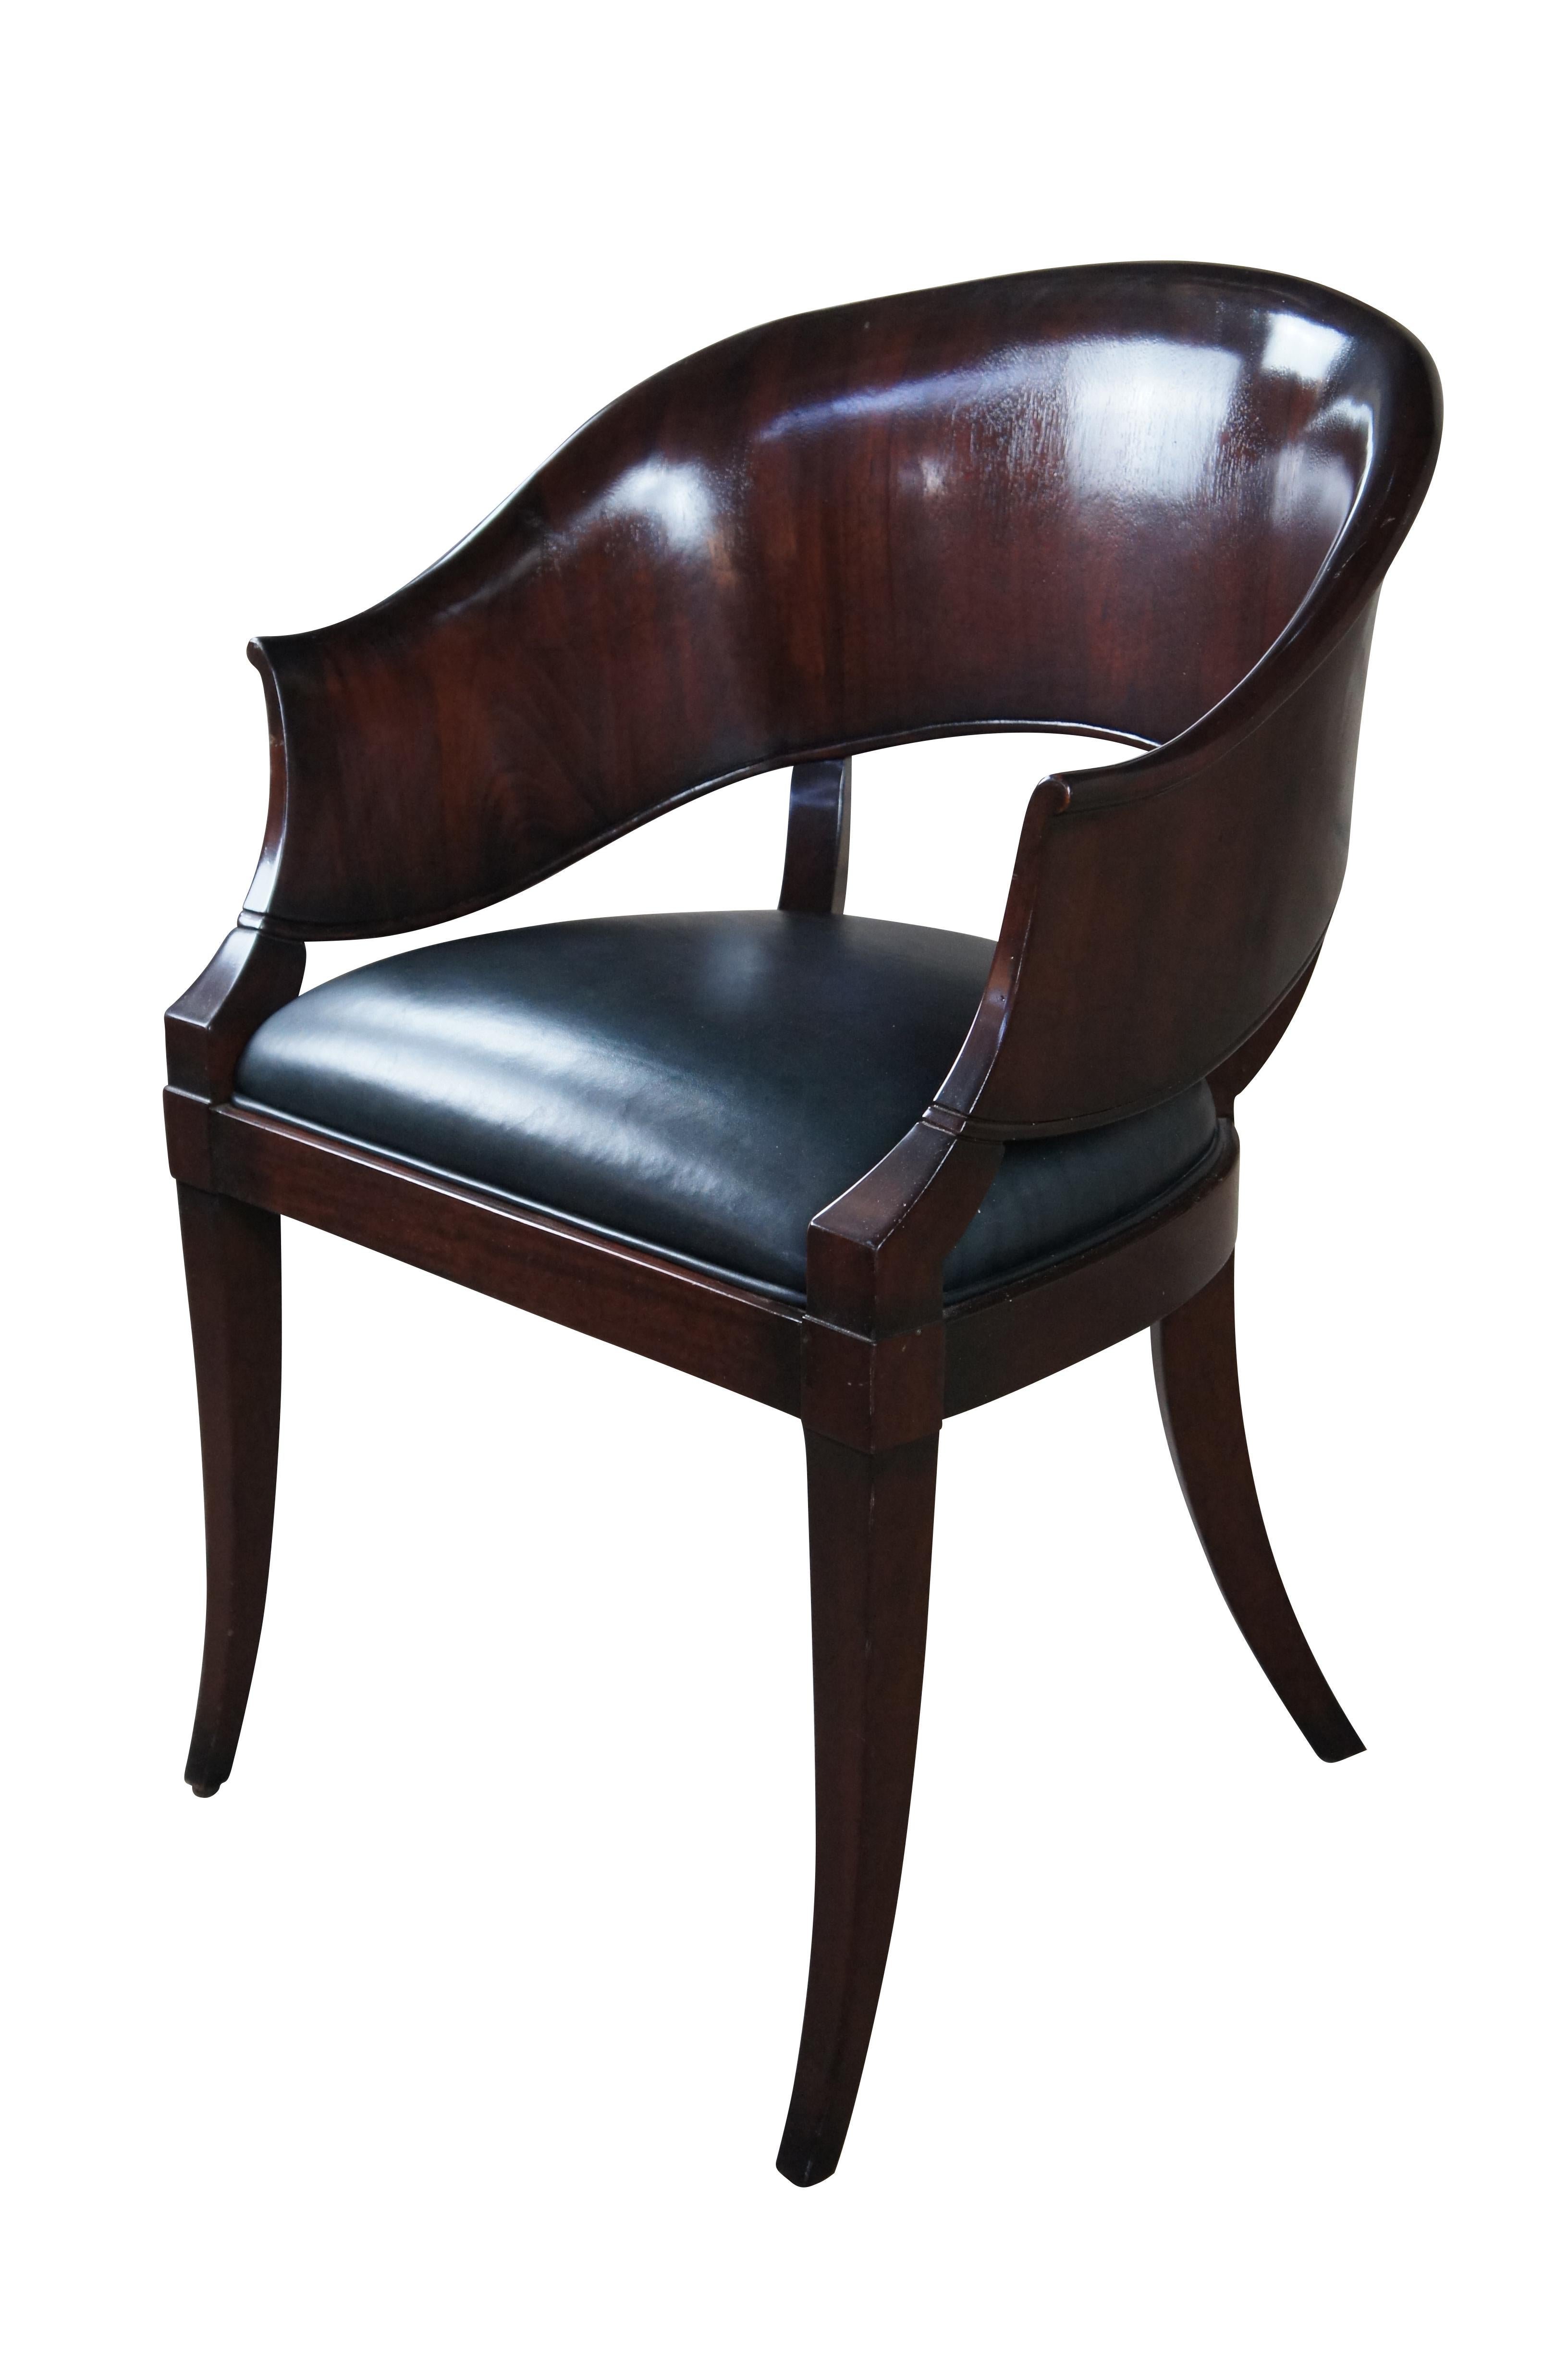 William Switzer Austrian Biedermeier style yoke back Arm Chair.  Made from mahogany with beautiful barrel back and leather upholstered seat.  Features square tapered saber legs.  William Switzer Fine Furniture Made in Canada,